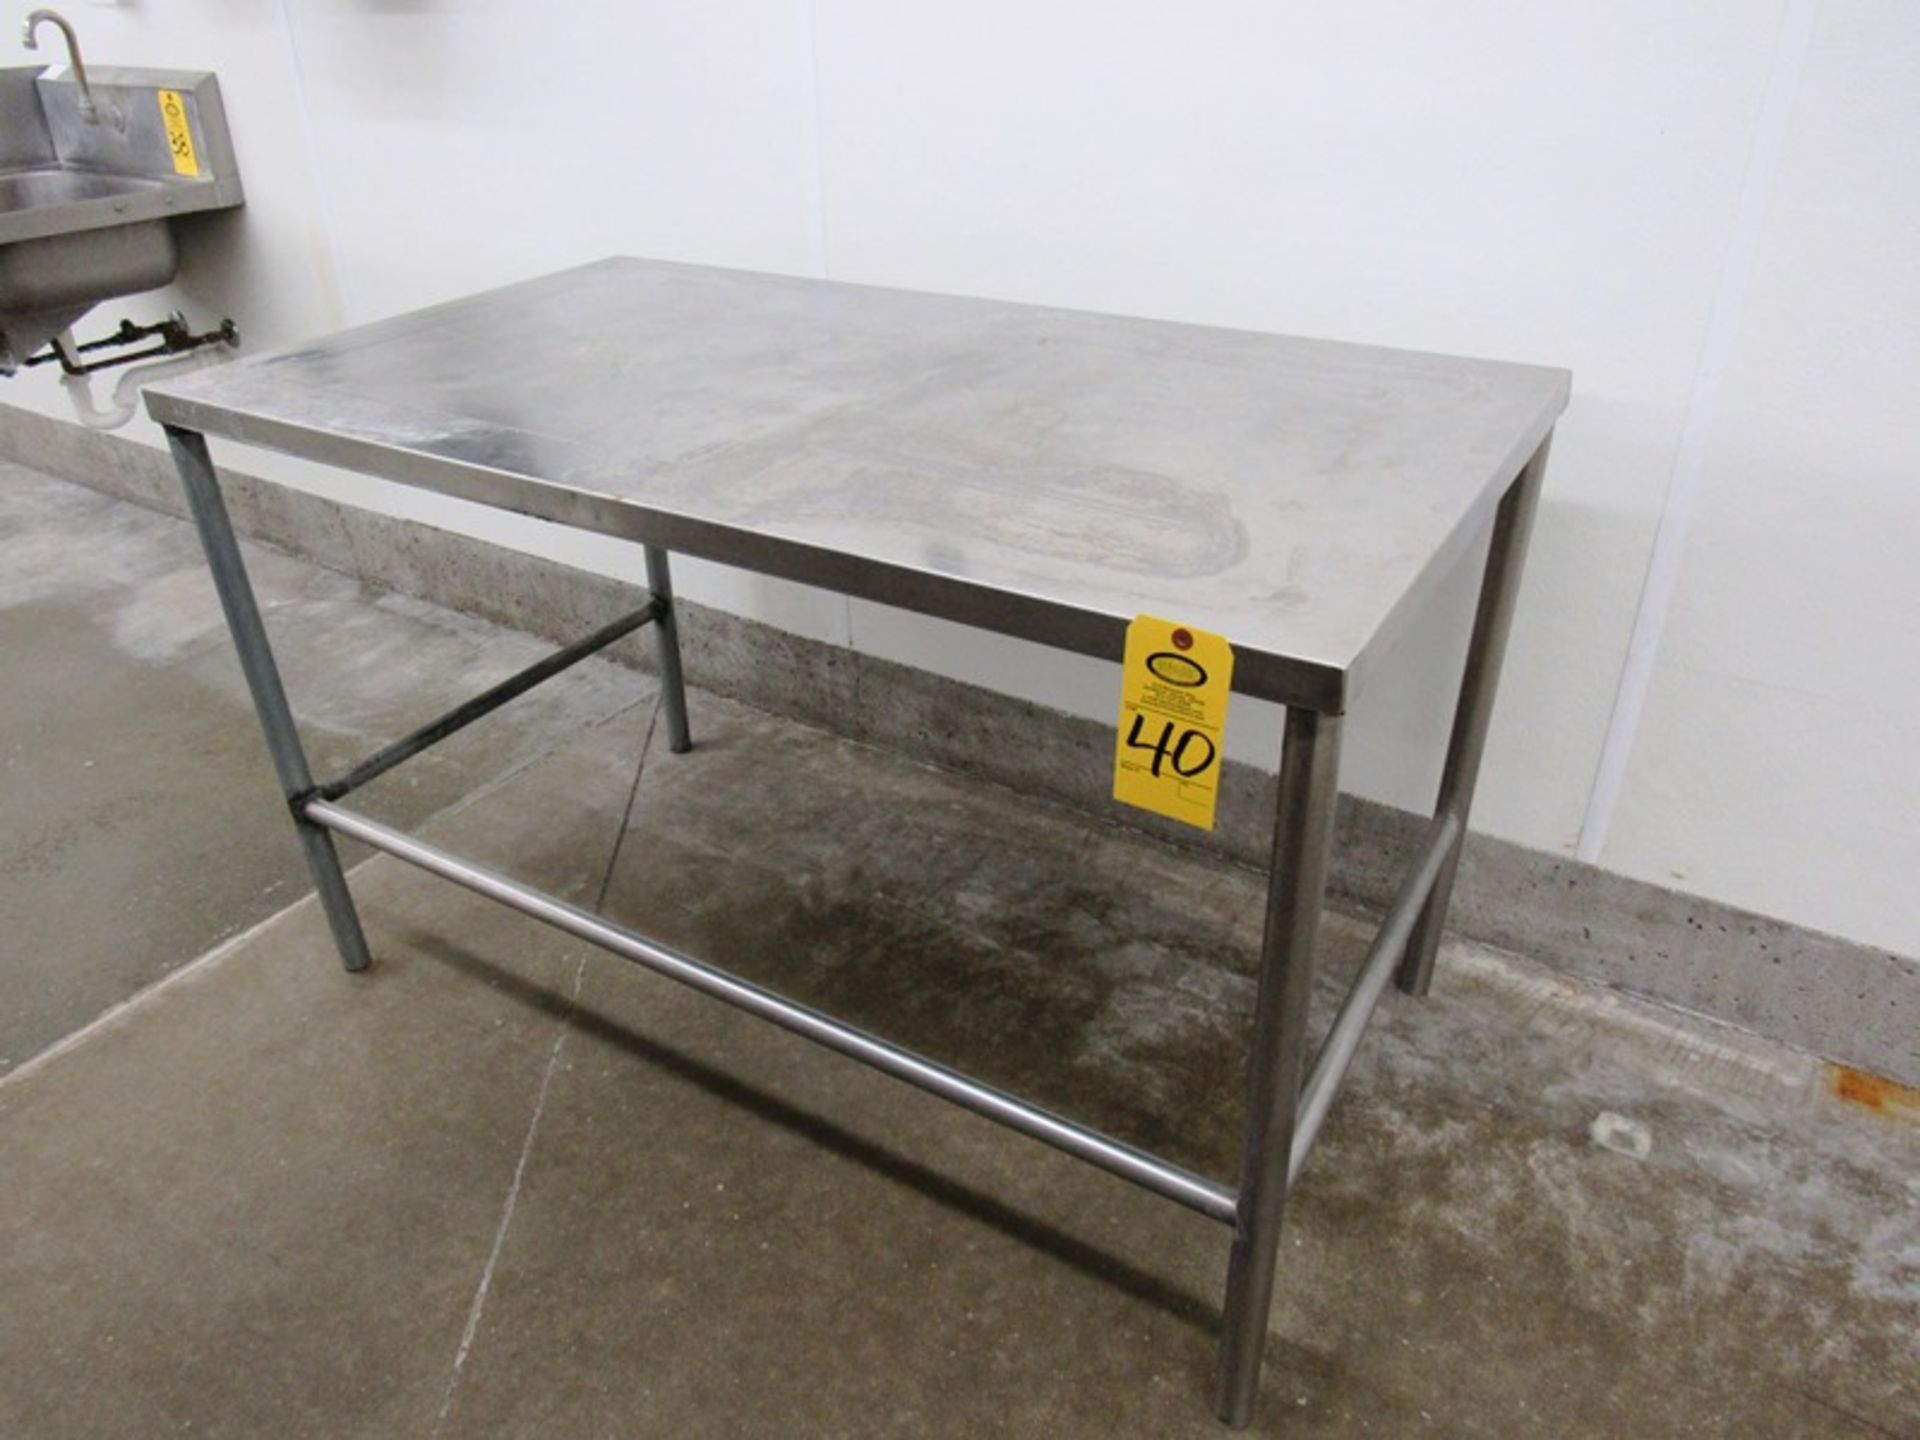 Stainless Steel Table, 30" W X 54" L X 33" T (Removal Begins July 5th) Loading Fee $35 Rigger: